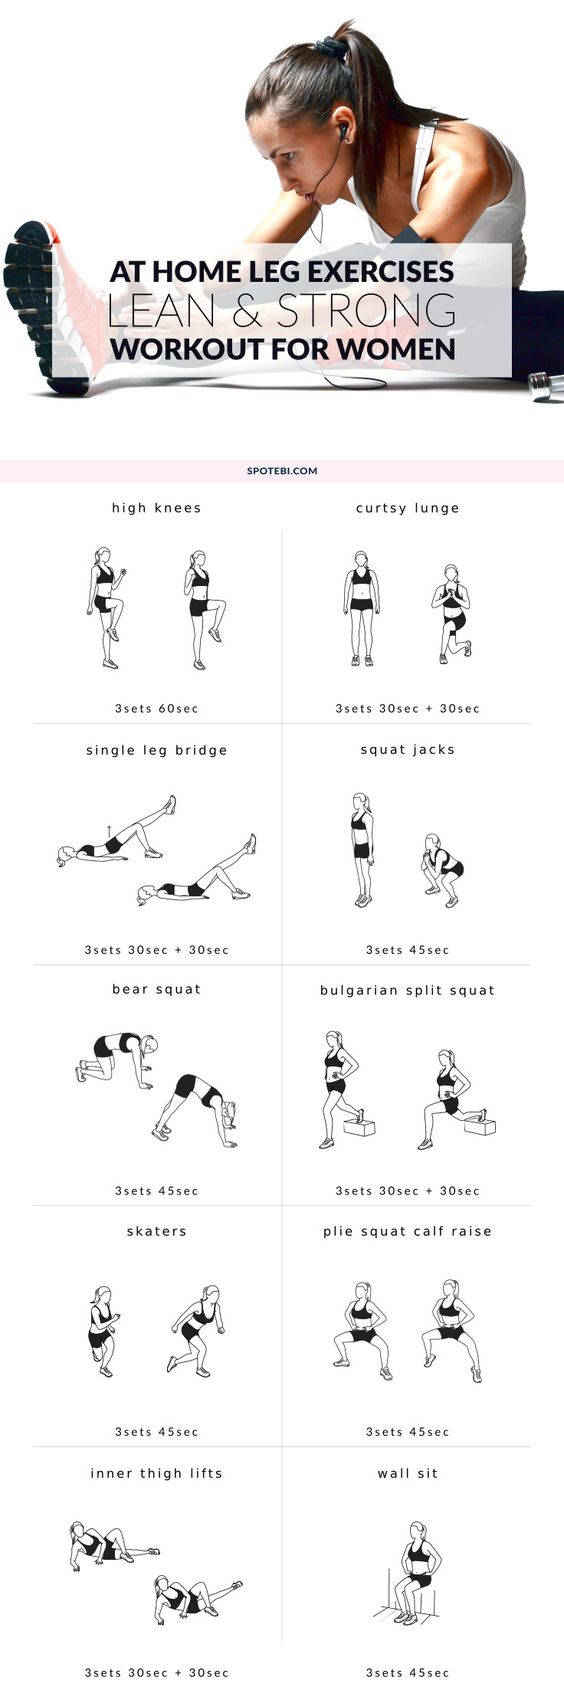 34 Amazing Weight Loss Workouts For Women That Can Be Done At Home! -  TrimmedandToned